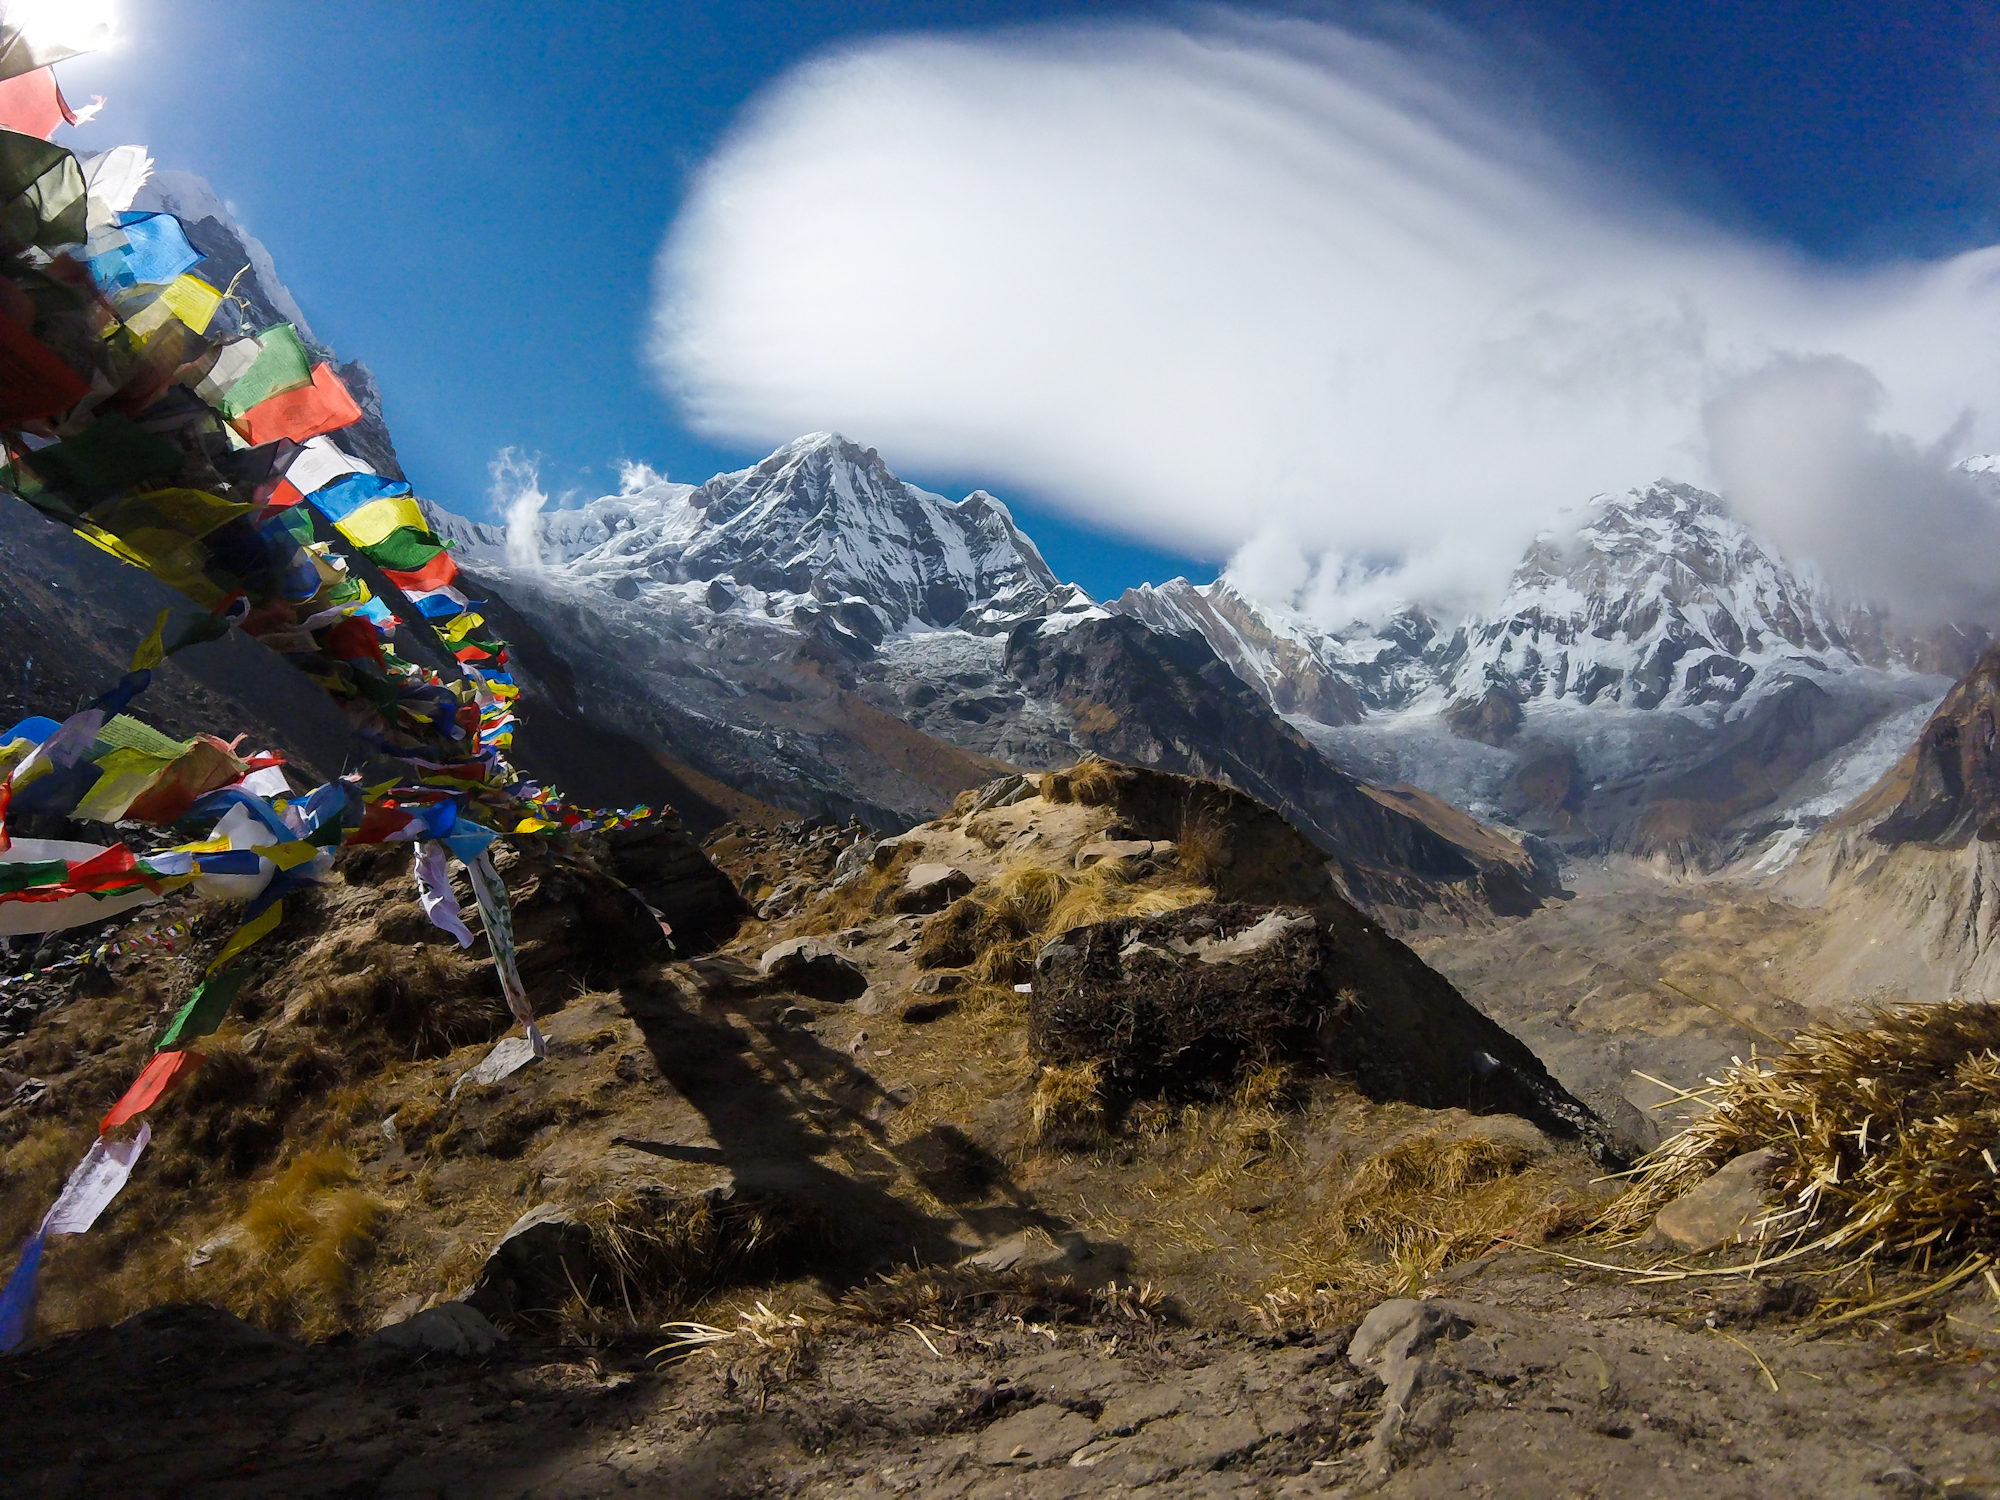 Nov 12.2, 2016Pictured ahead is Annapurna South, the 101st highest mountain in the world. This place holds an obvious sentiment. Prayer flags fly, cracking in the wind. They are the colors of our elements; of sky, air, fire, water, and earth.